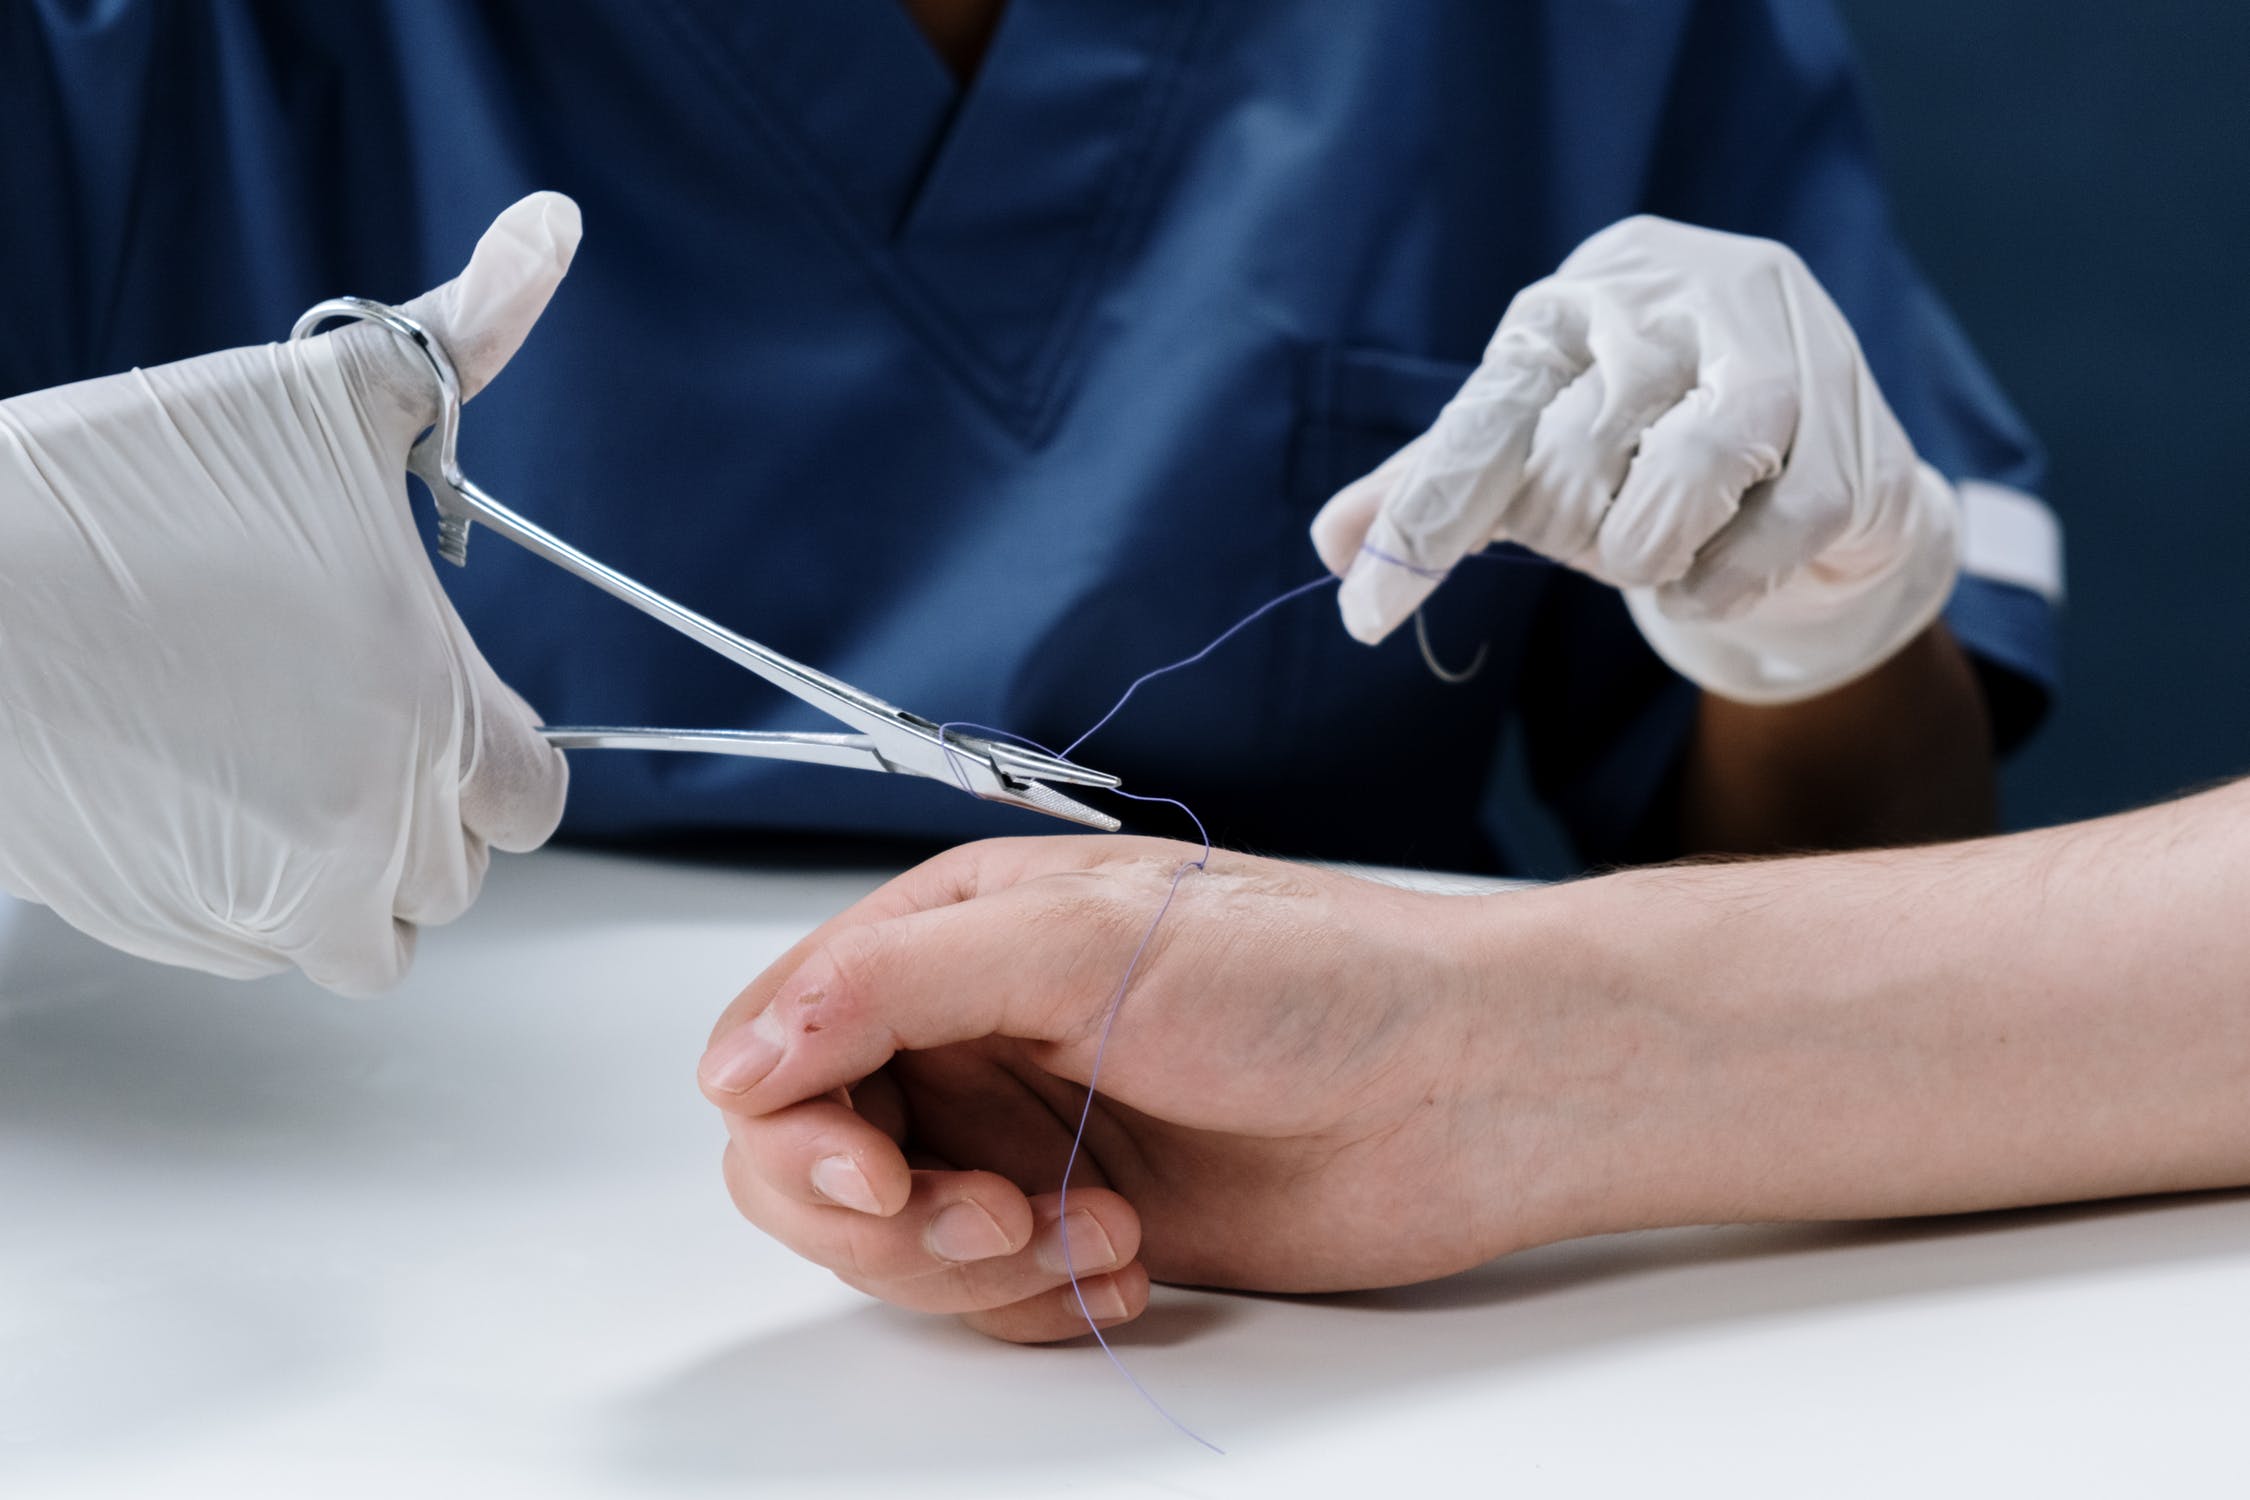 Can urgent care give you stitches?